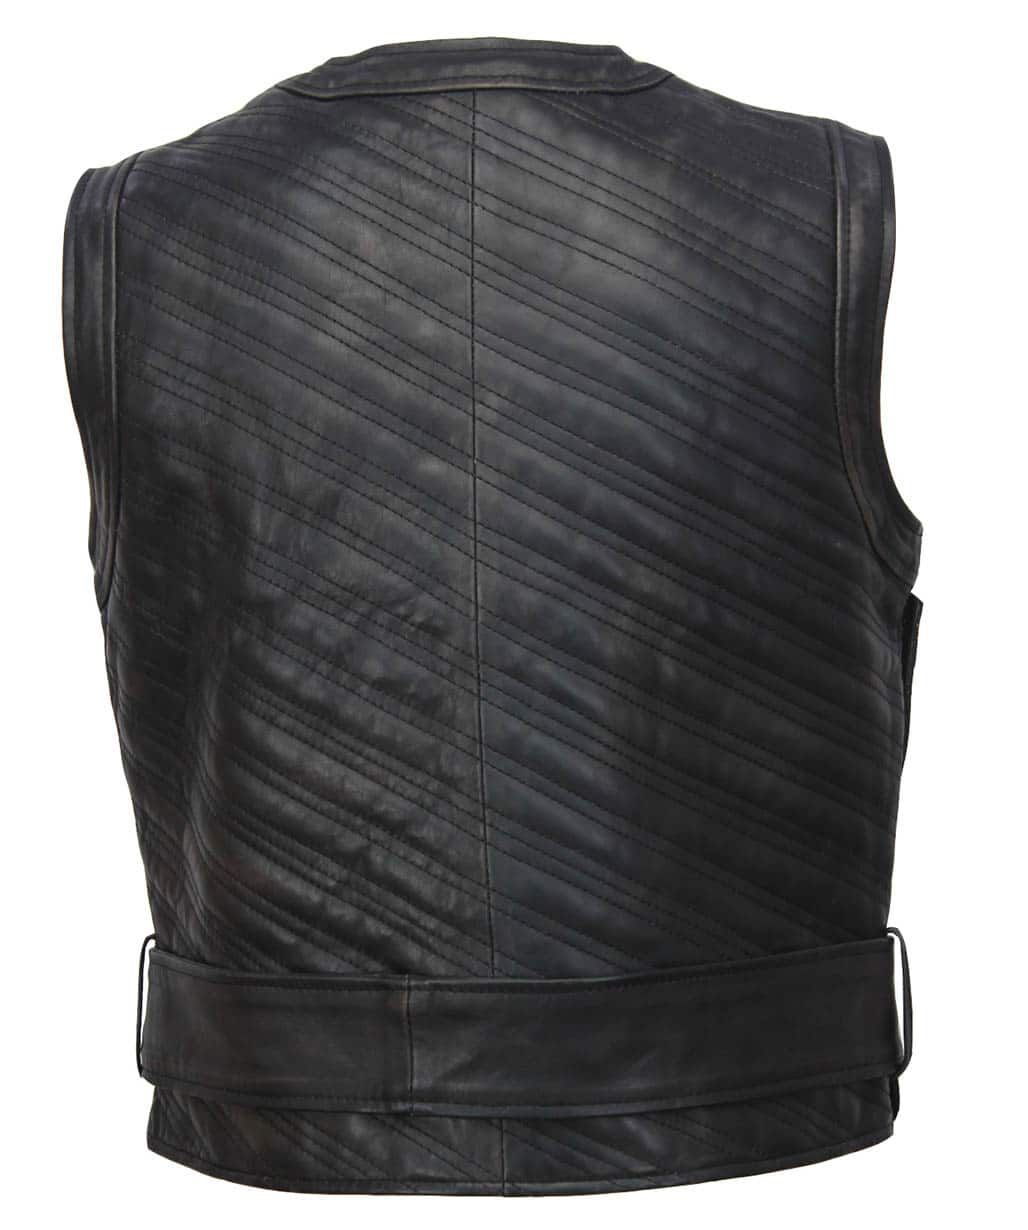 seven-kings-must-die-uhtred-ragnarson-leather-vest-outfit-Halloween